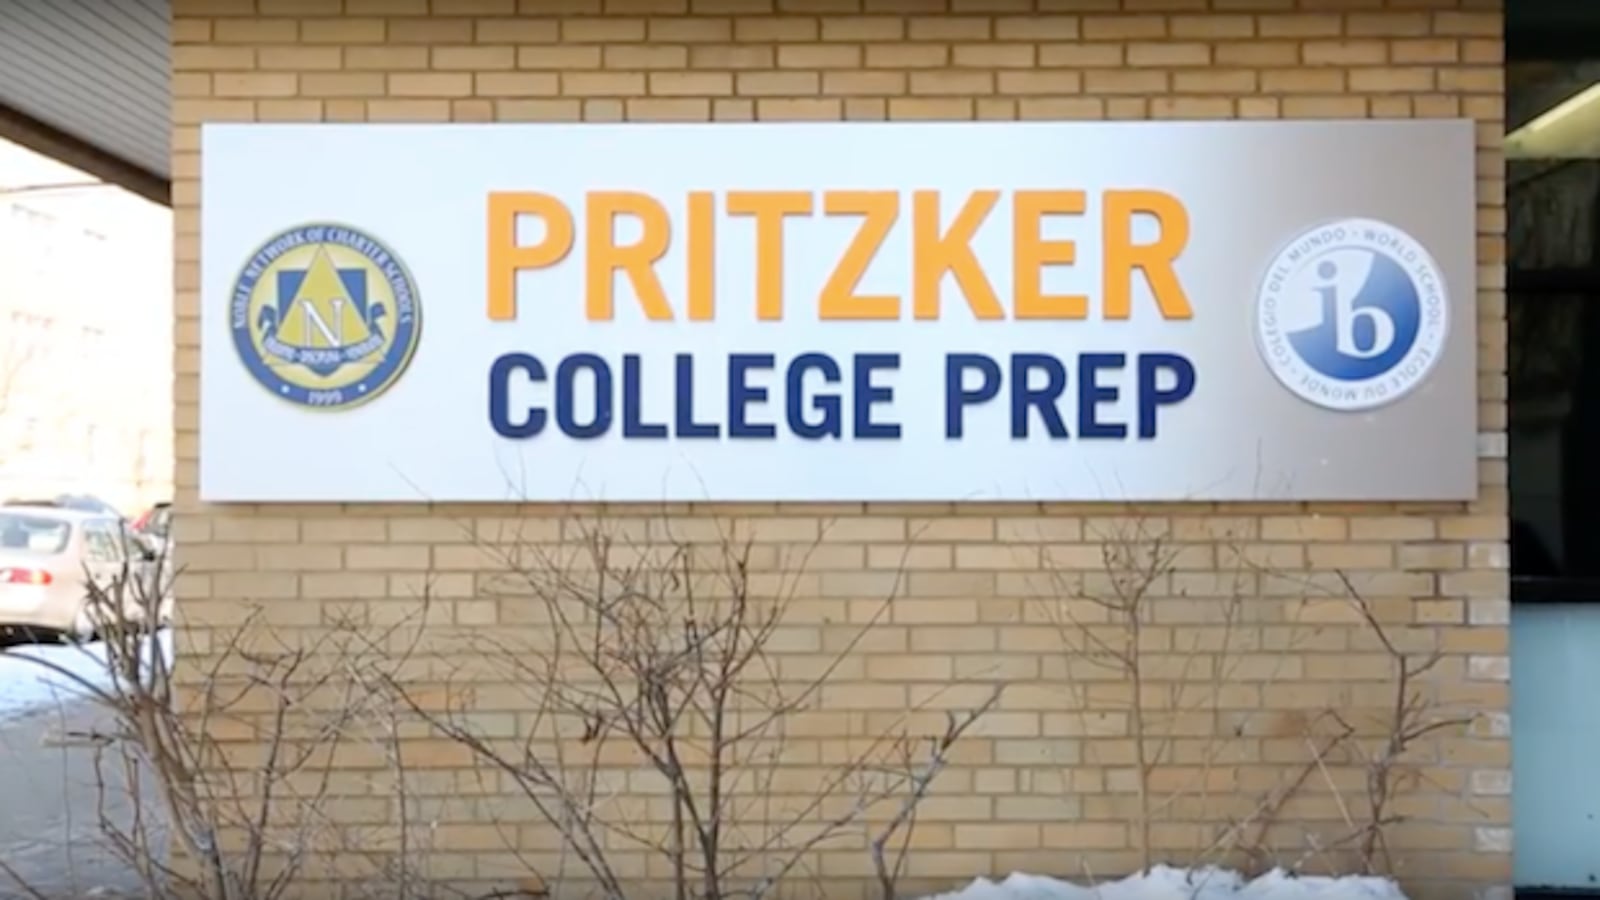 One Noble campus is named for Penny Pritzker, former U.S. commerce secretary and sister to Illinois' incoming governor.